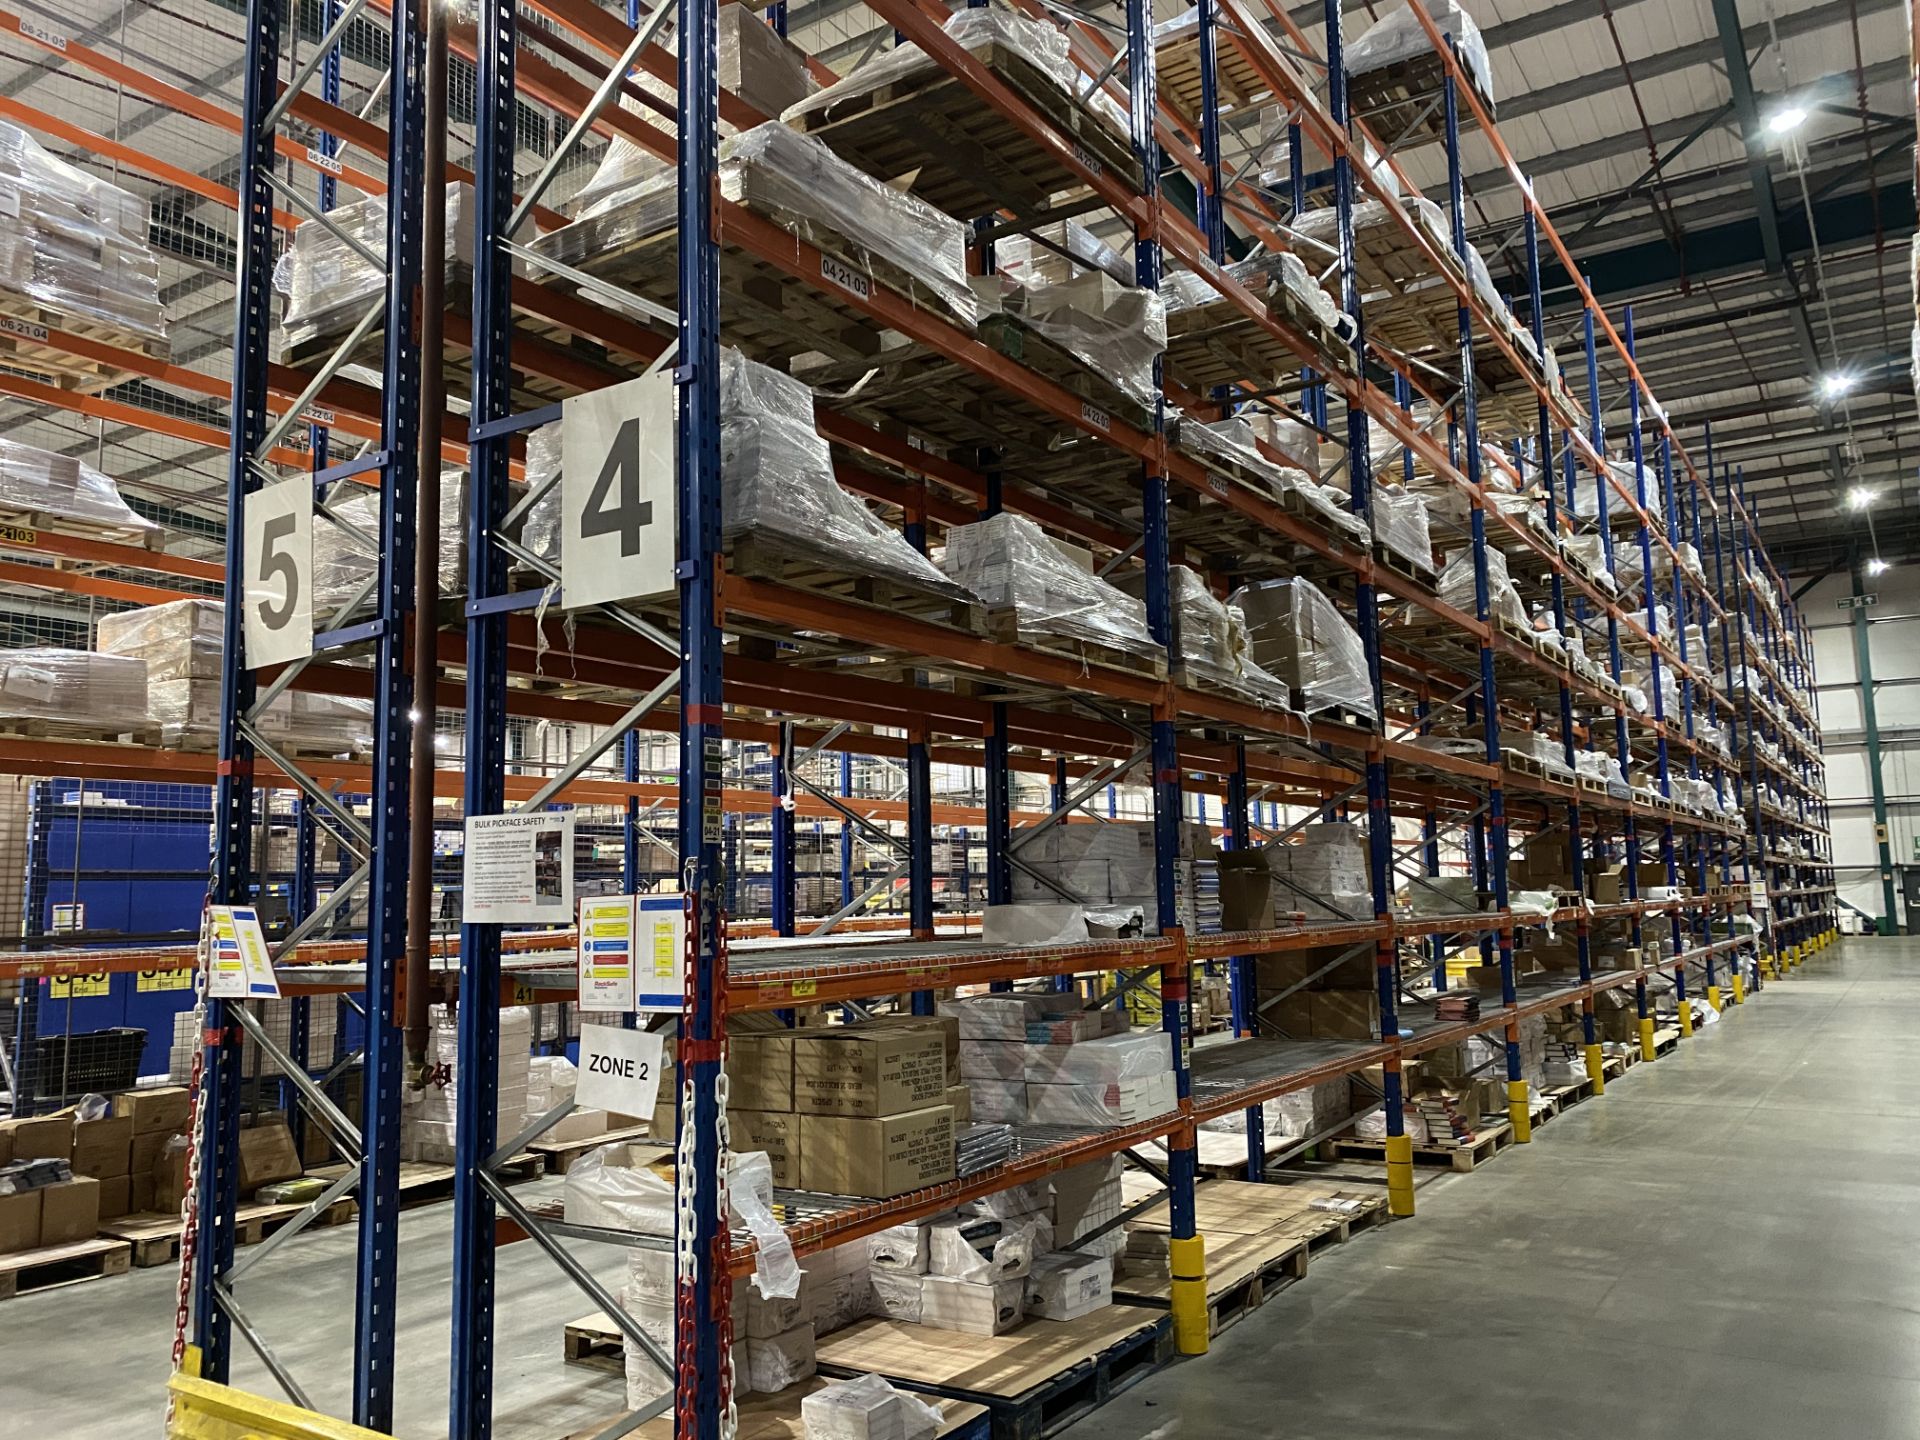 18 x Bays of Heavy Duty Quick-Form Pallet Racking